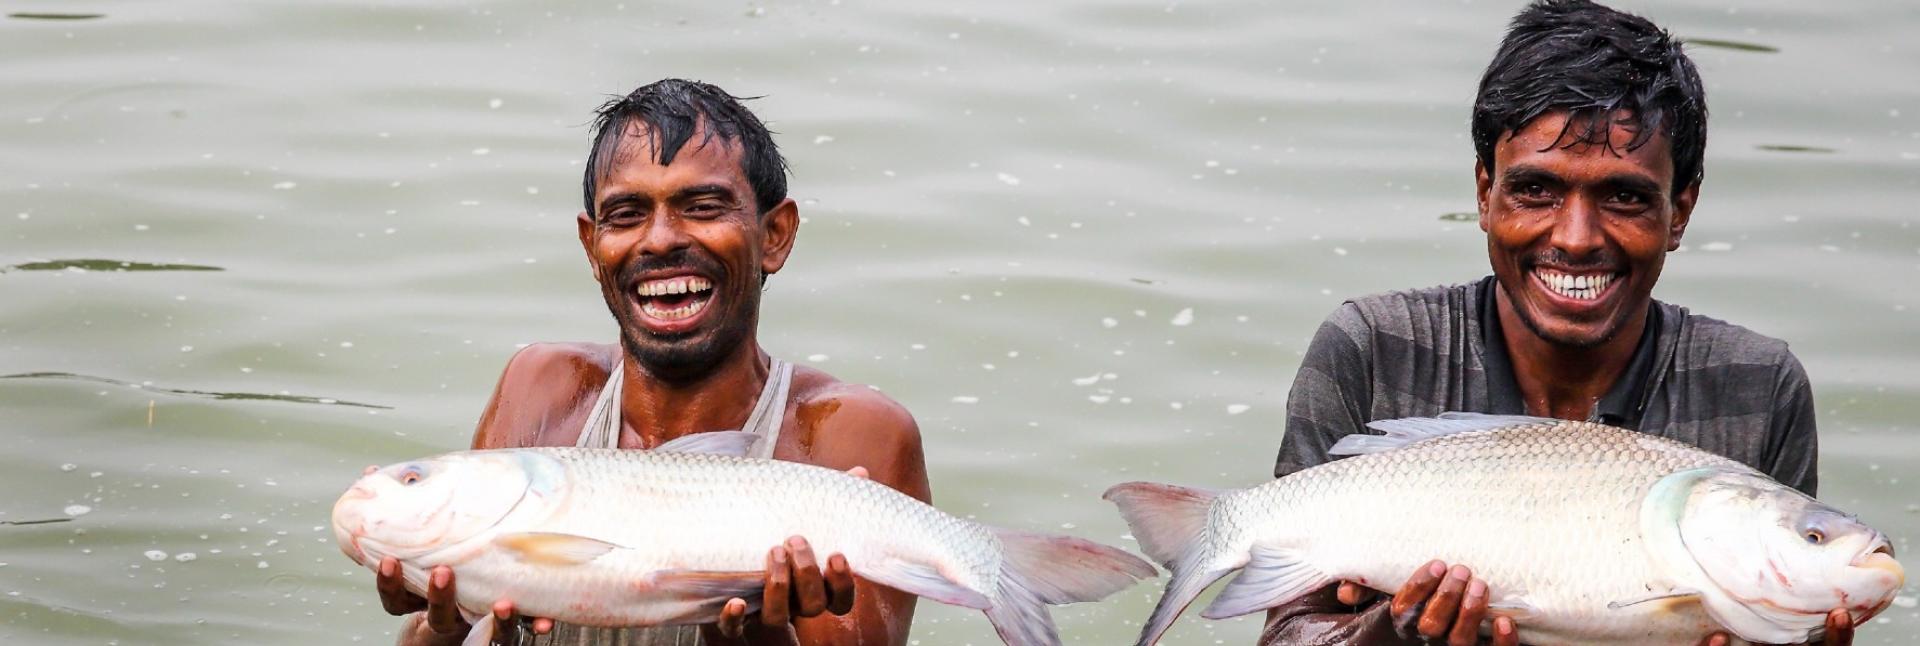 Two men hold big cream-colored fishes and laugh, while standing in water.